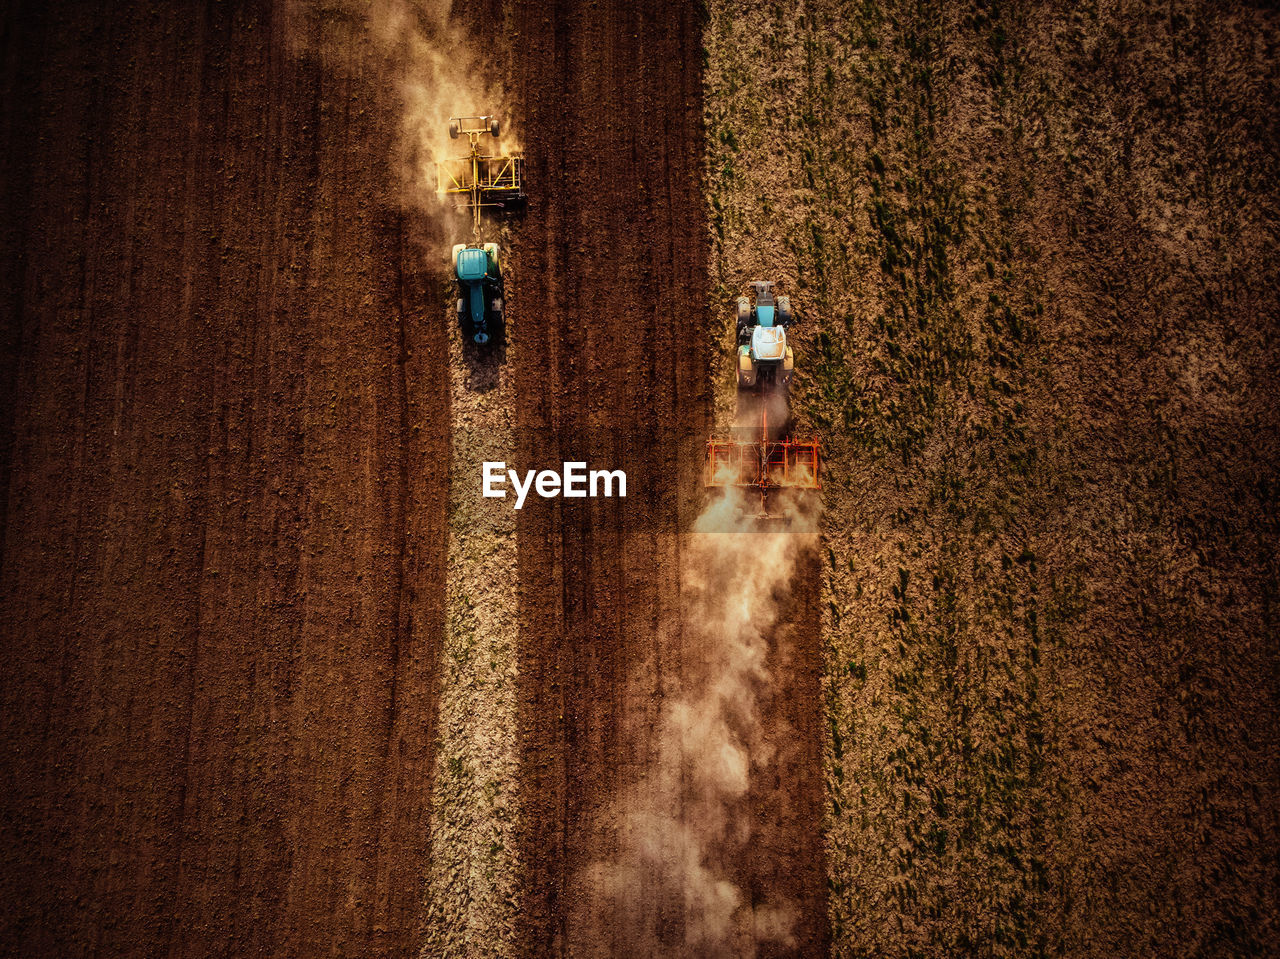 High angle view of tractors on agricultural field